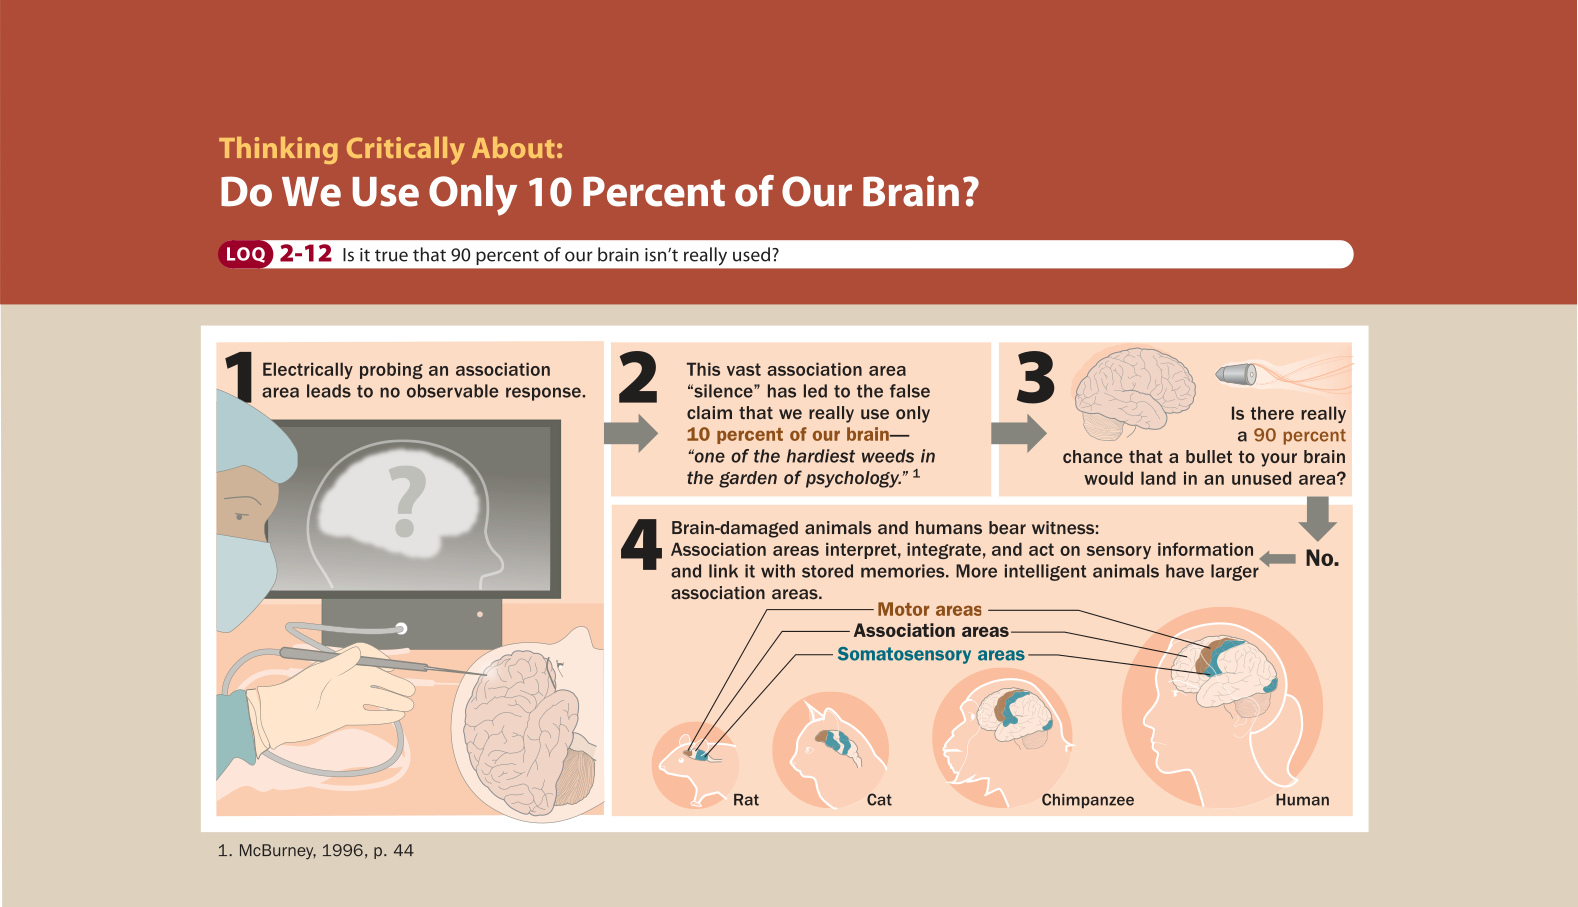 An infographic titled Using More than 10 Percent of Our Brain is shown. You can read full description from the link below